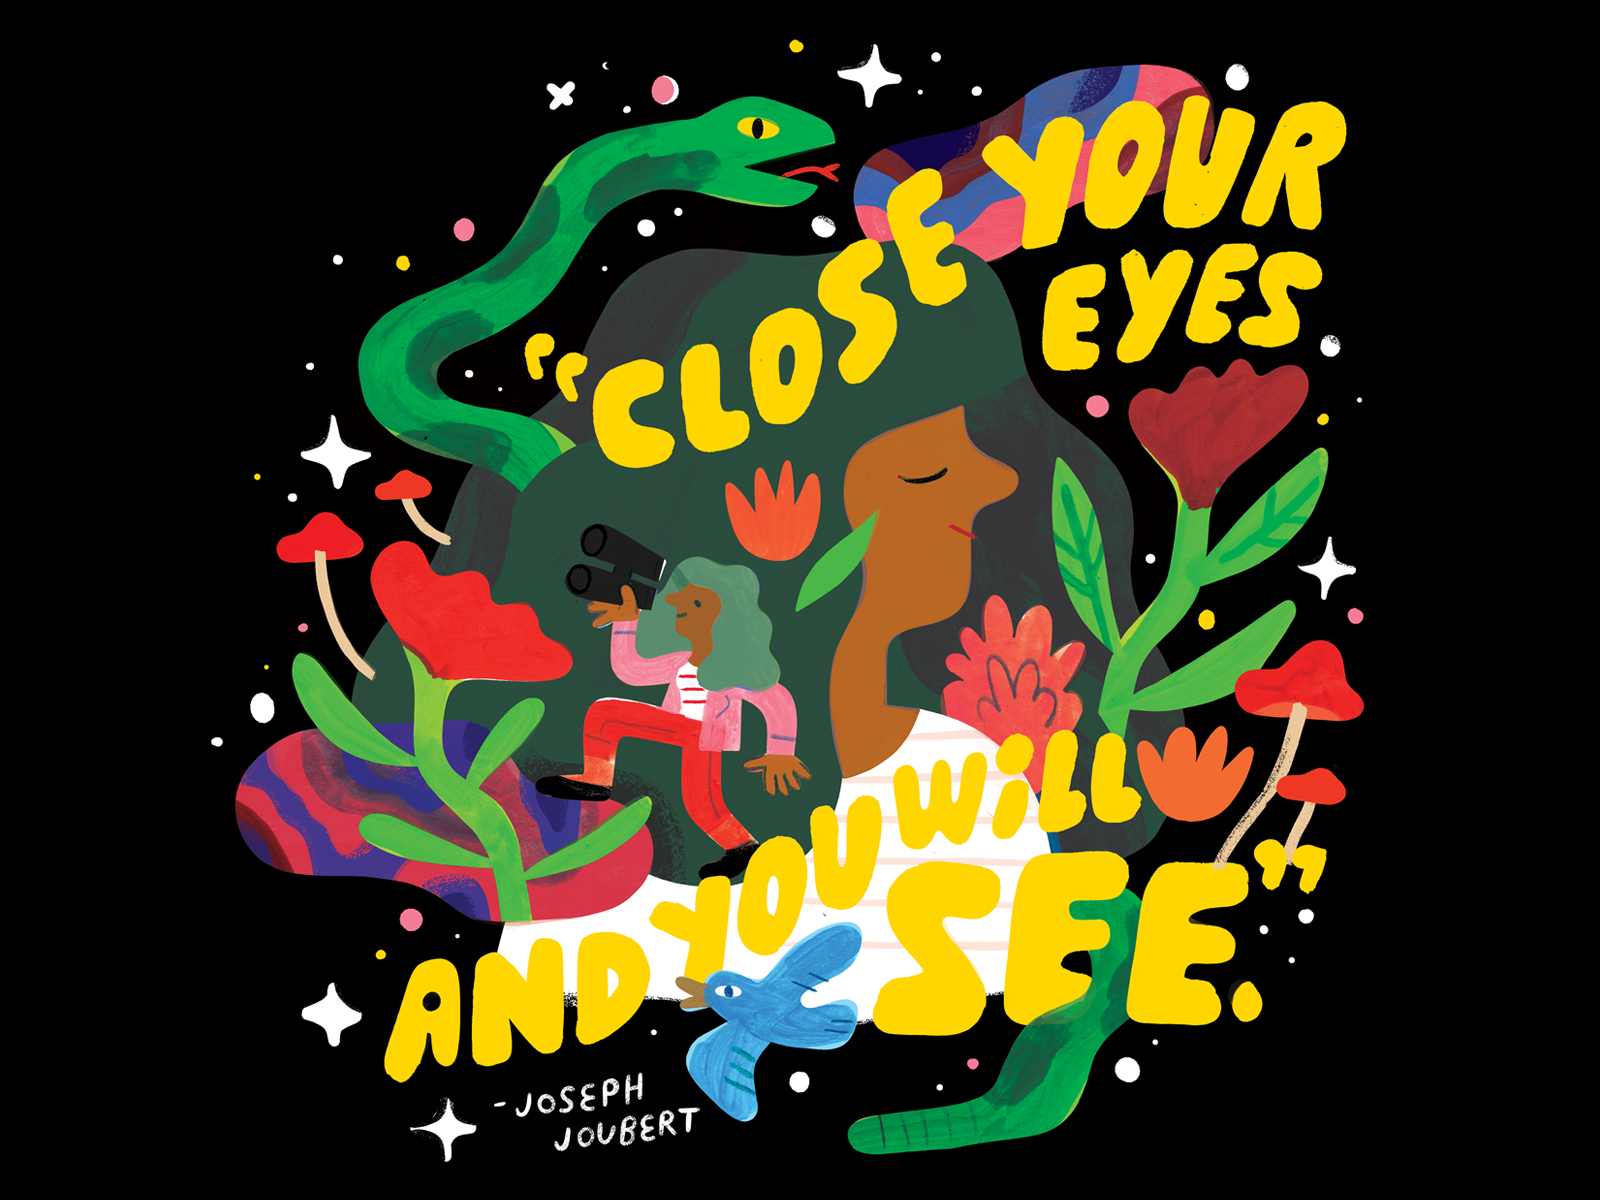 Creative Pep Talk Podcast PEPisode 304 andy j miller creative career creative pep talk creativity design illustration lettering podcast podcast art woman